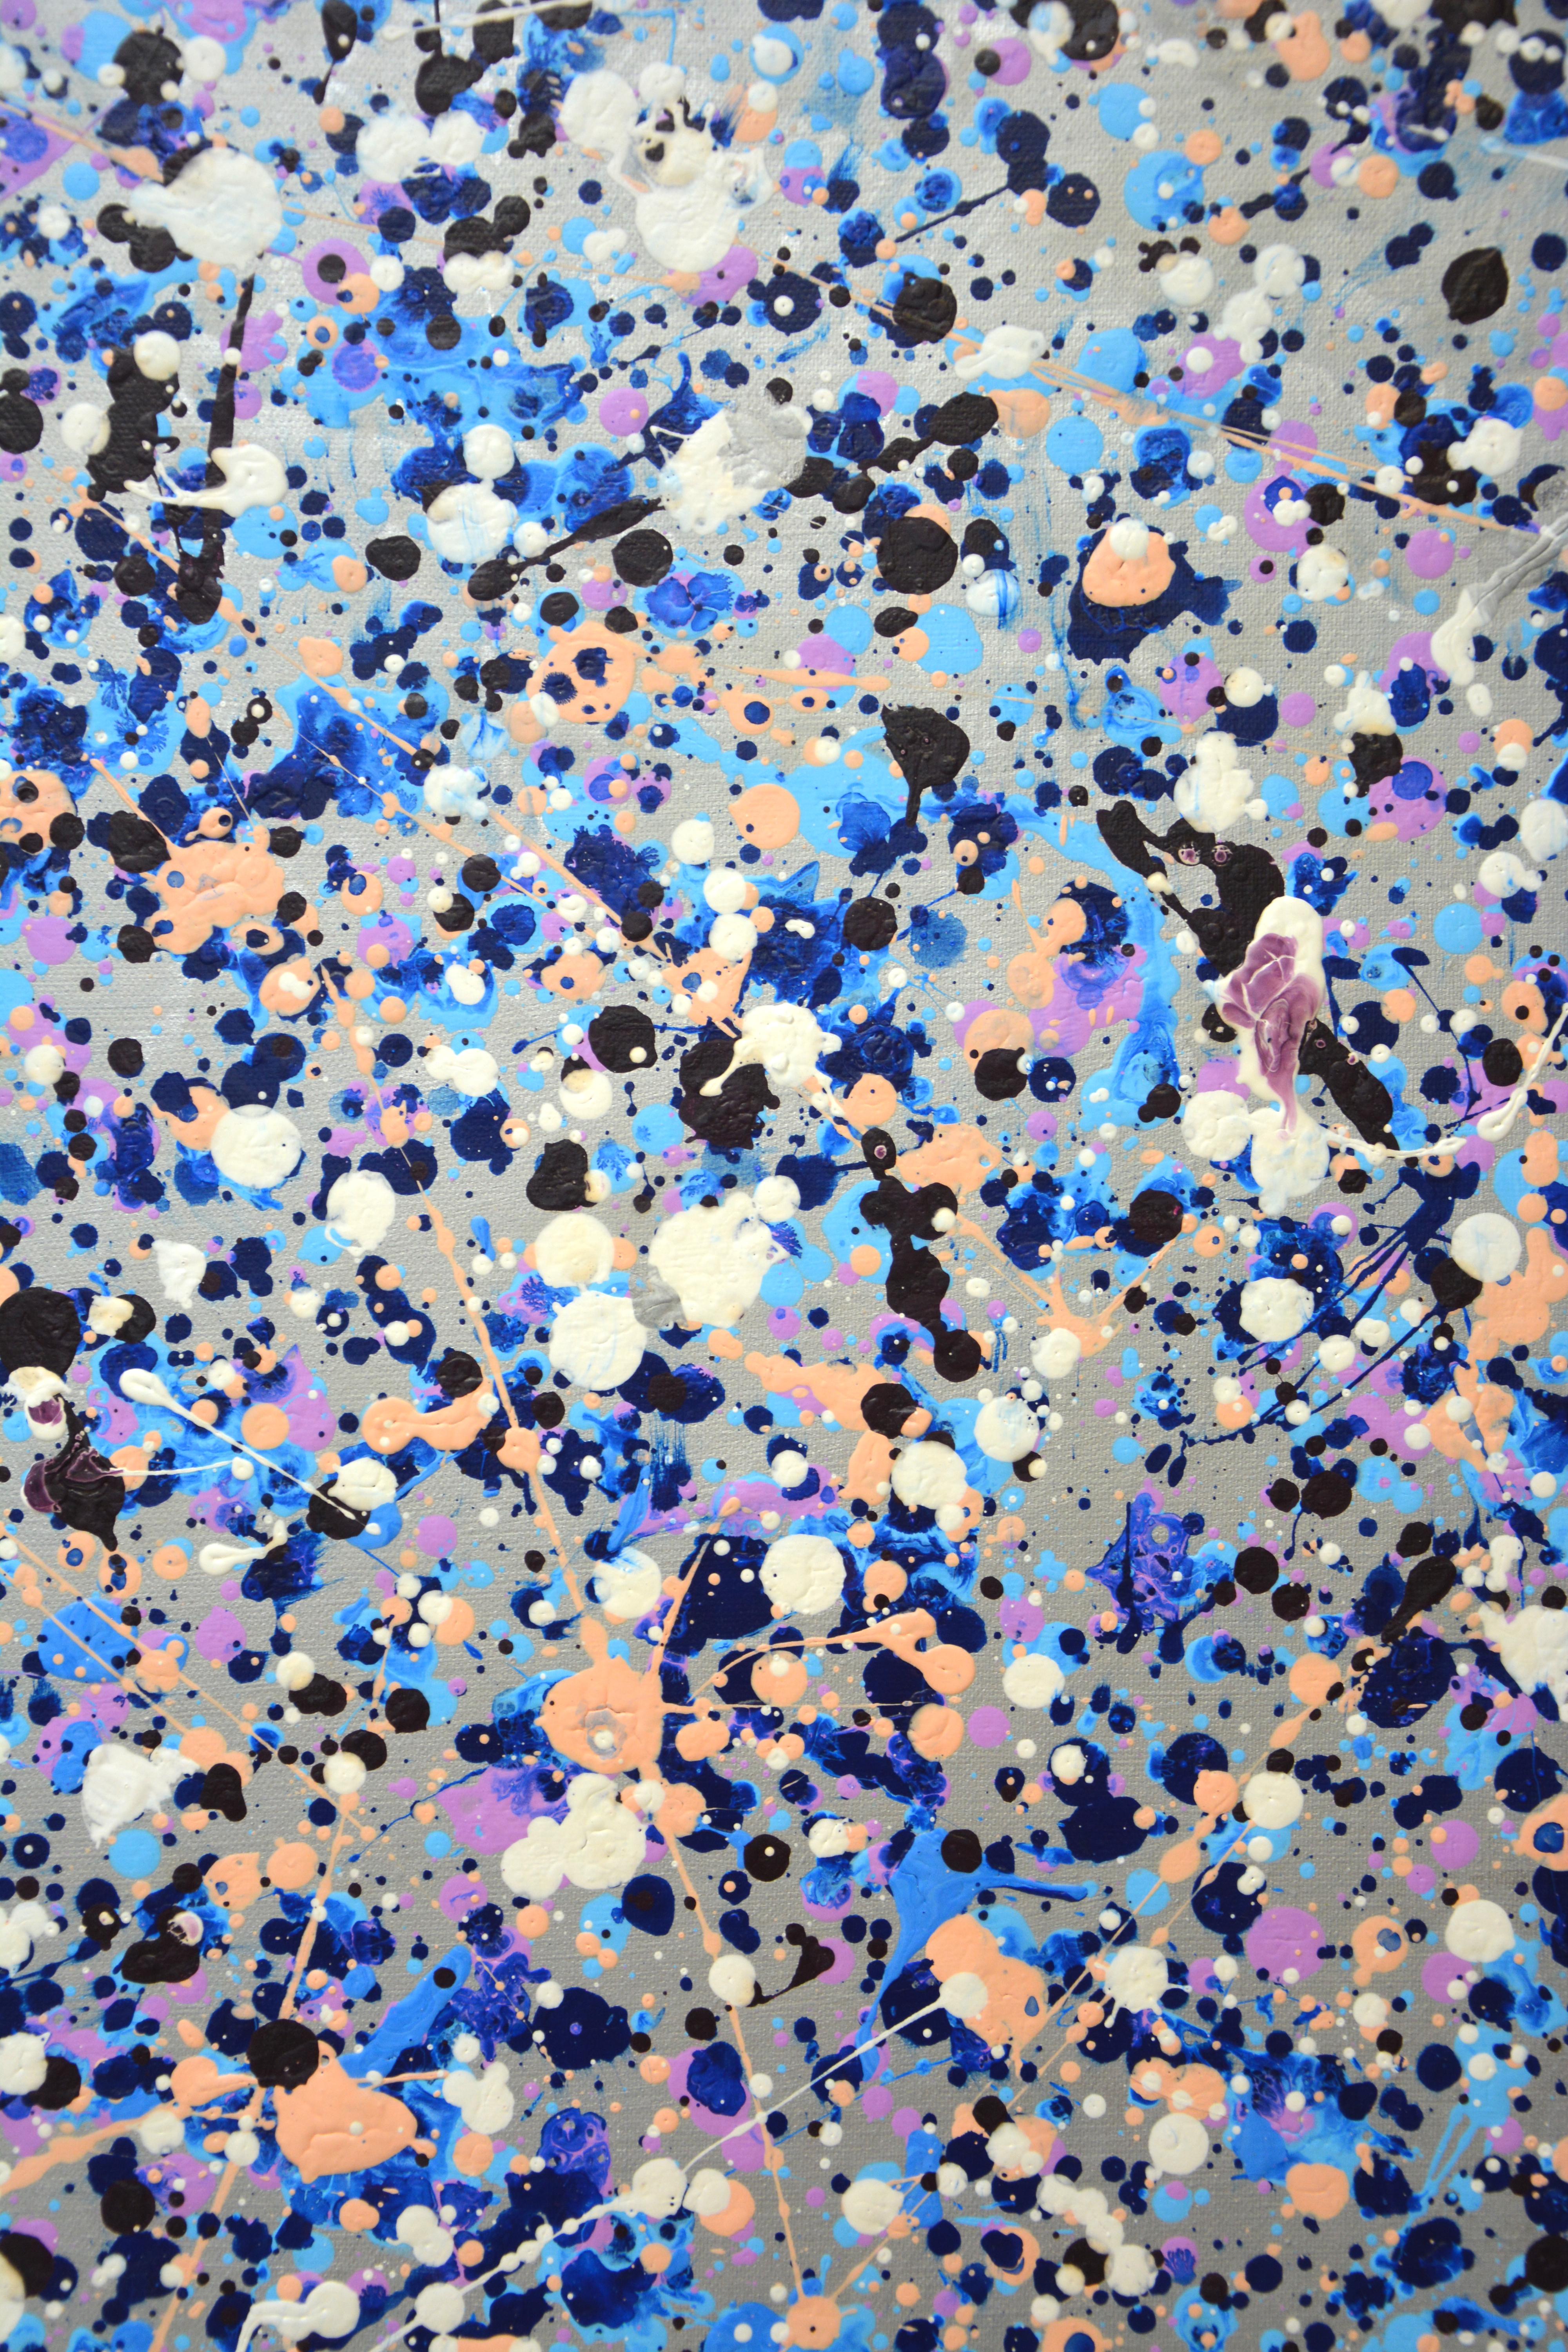 Abstraction 22. A modern expressive abstract painting created by drops and splashes of paint that sparkles and shimmers! The colors are superimposed on each other and also correspond to different points. There are many blue, white, pink drops on a